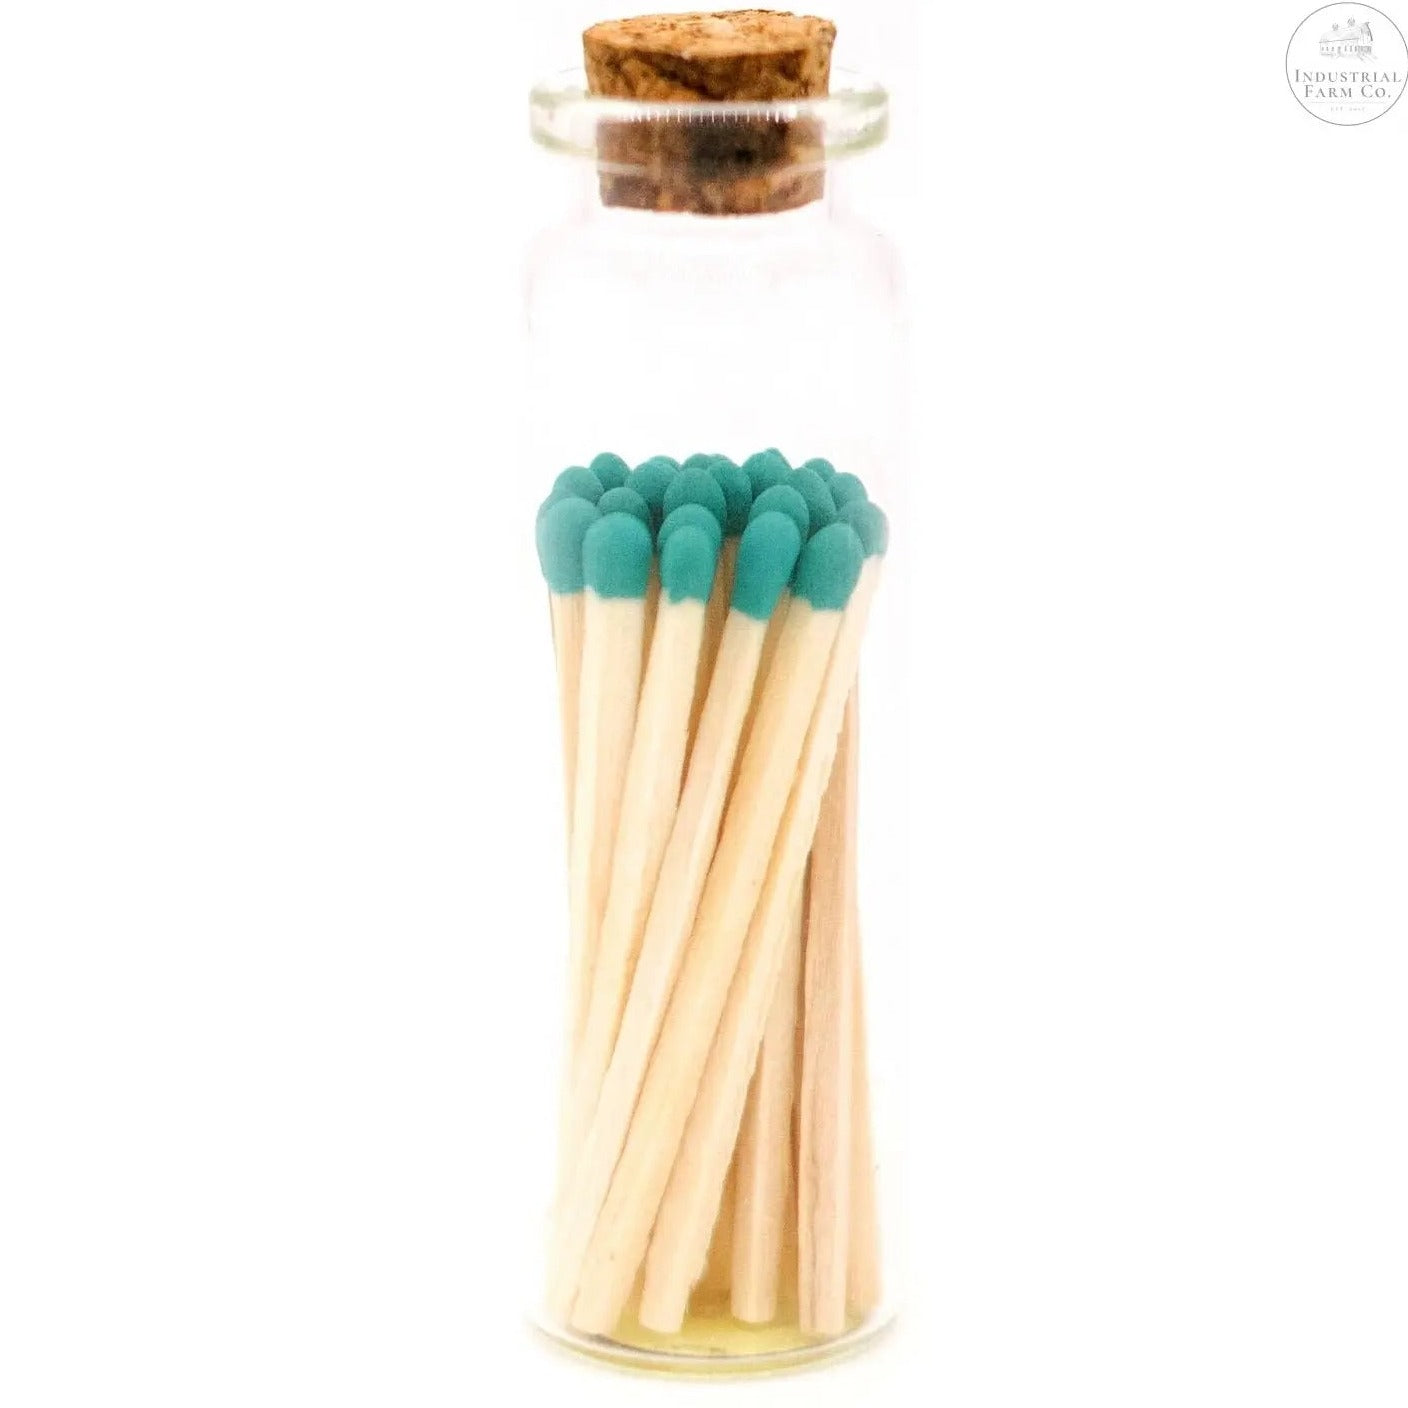 Decorative Mini Matches In Glass Container  Black Tip   | Industrial Farm Co